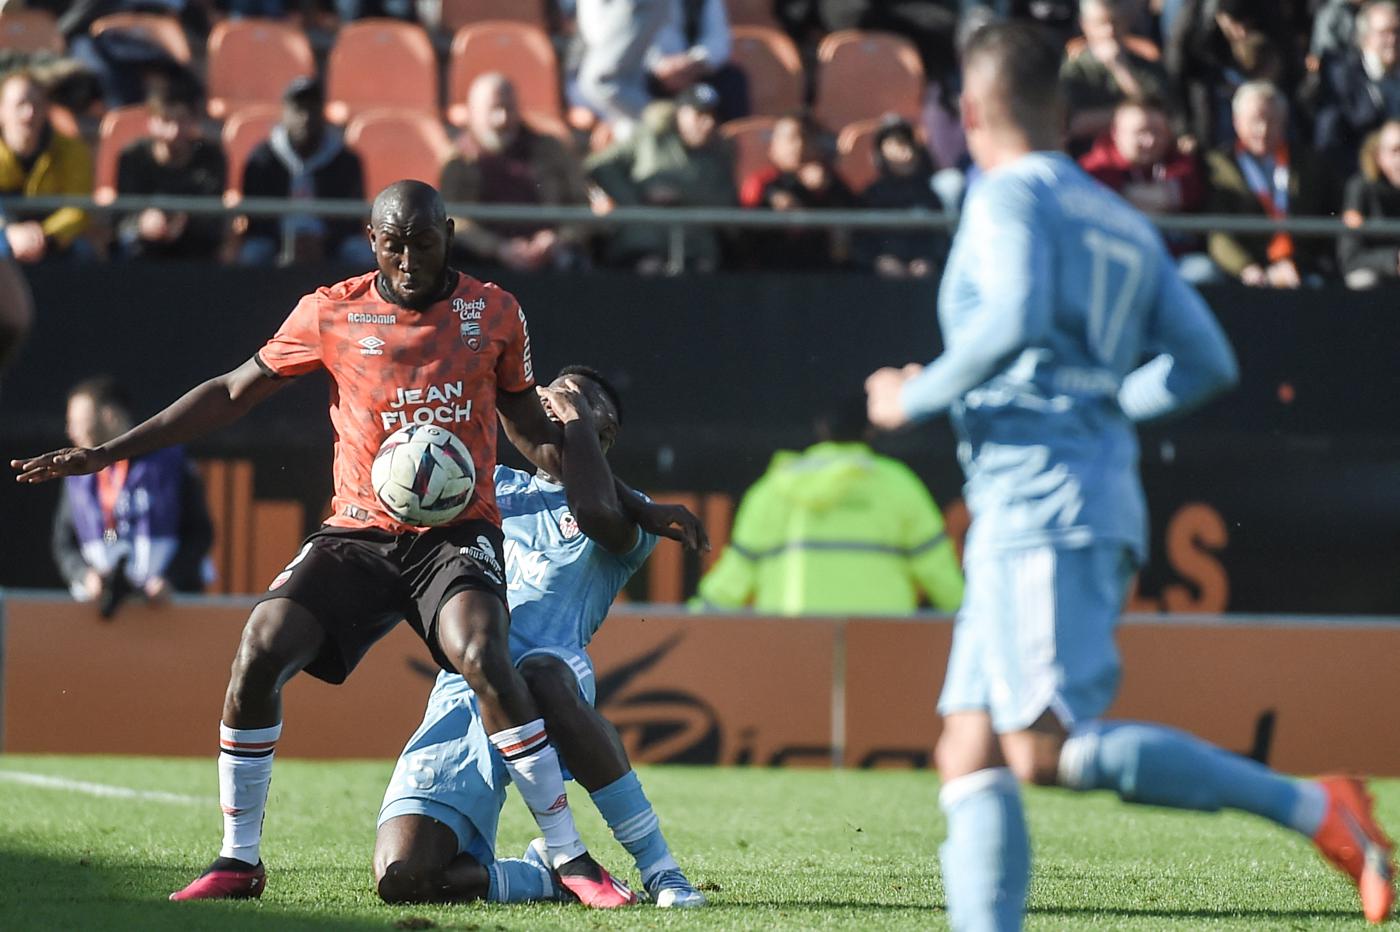 Lorient - Ajaccio - 3:0. French Championship, 24th round. Match review, statistics